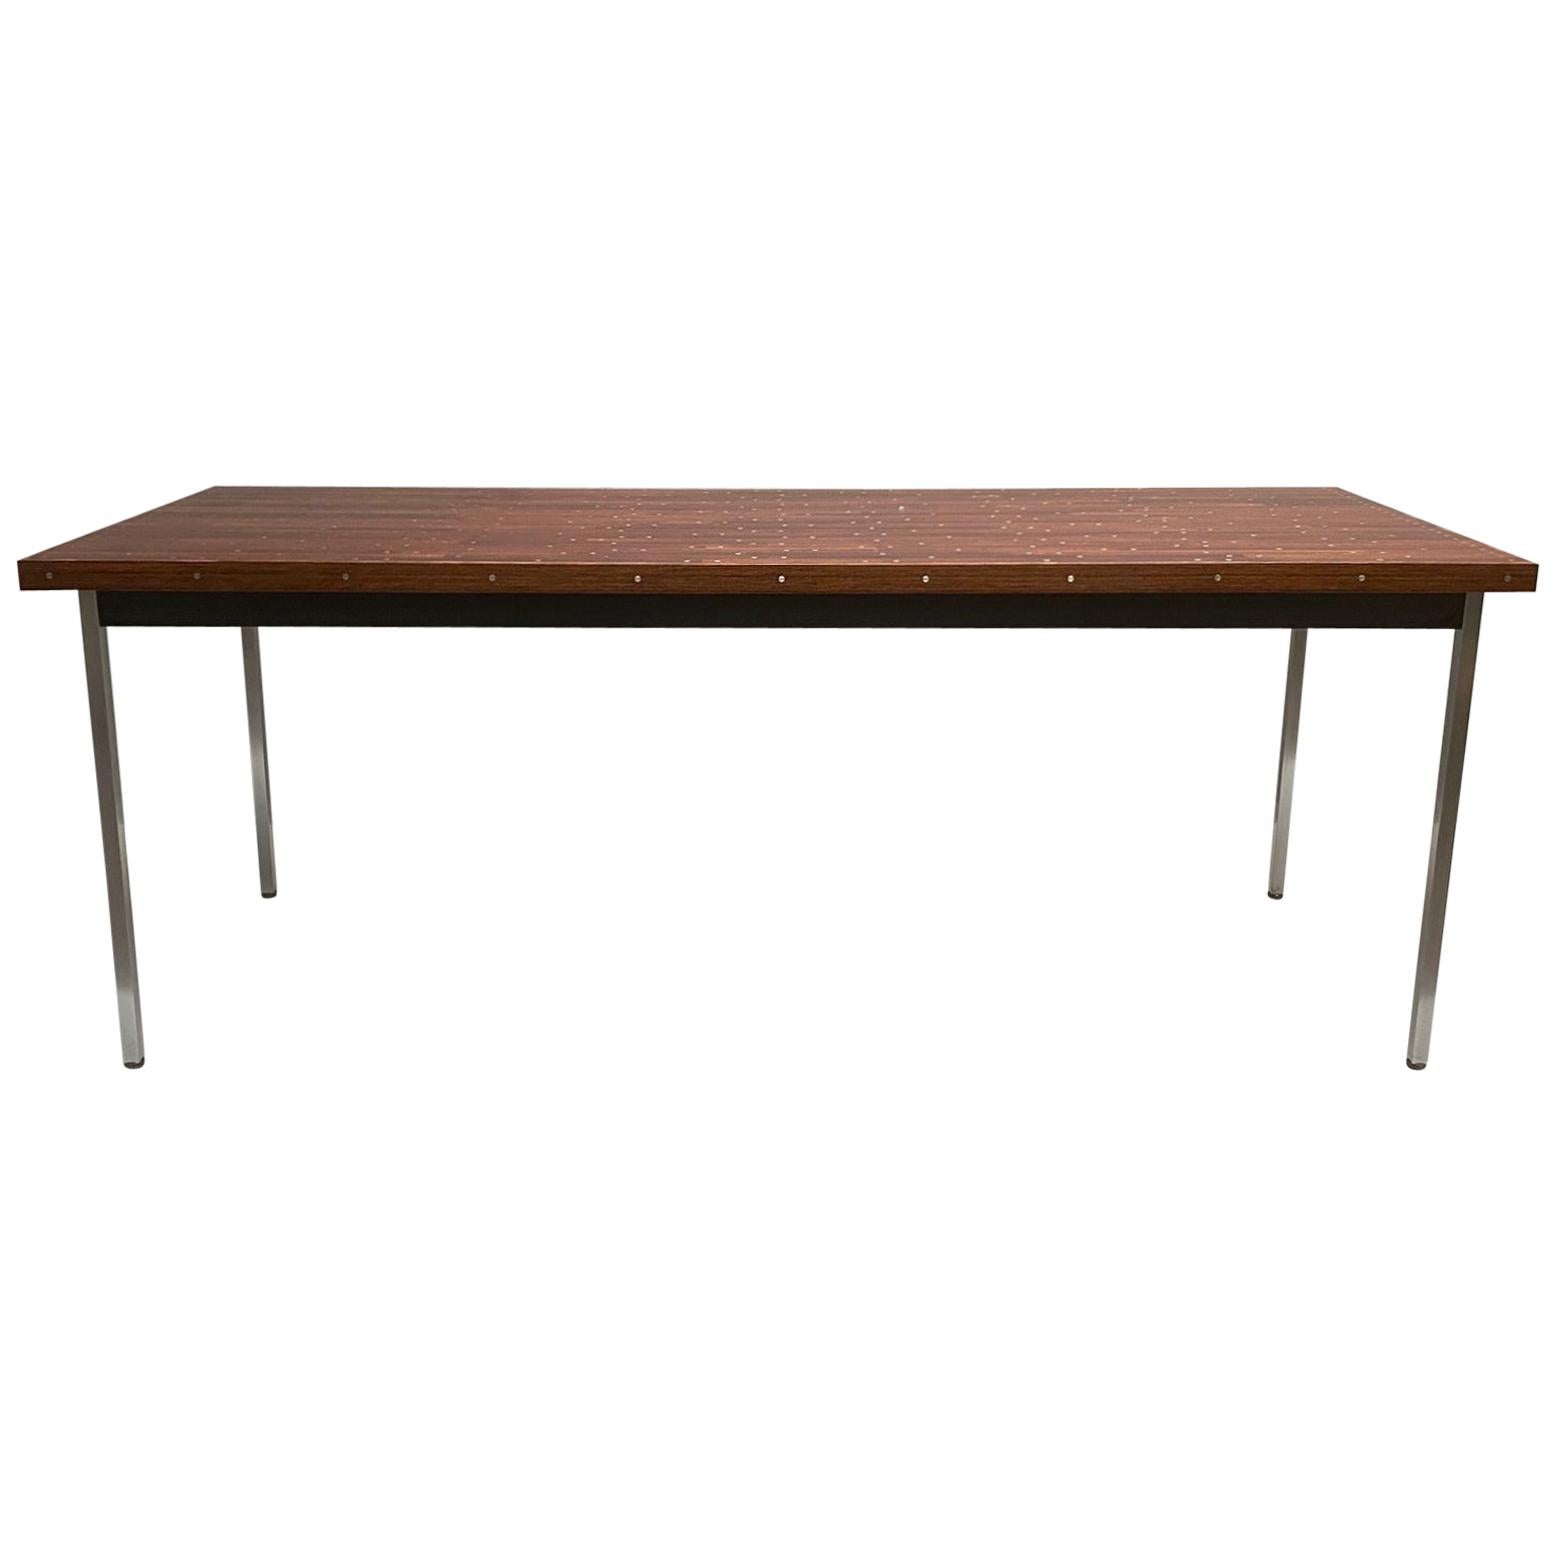 Table by Philippe Neerman for De Coene from National Library